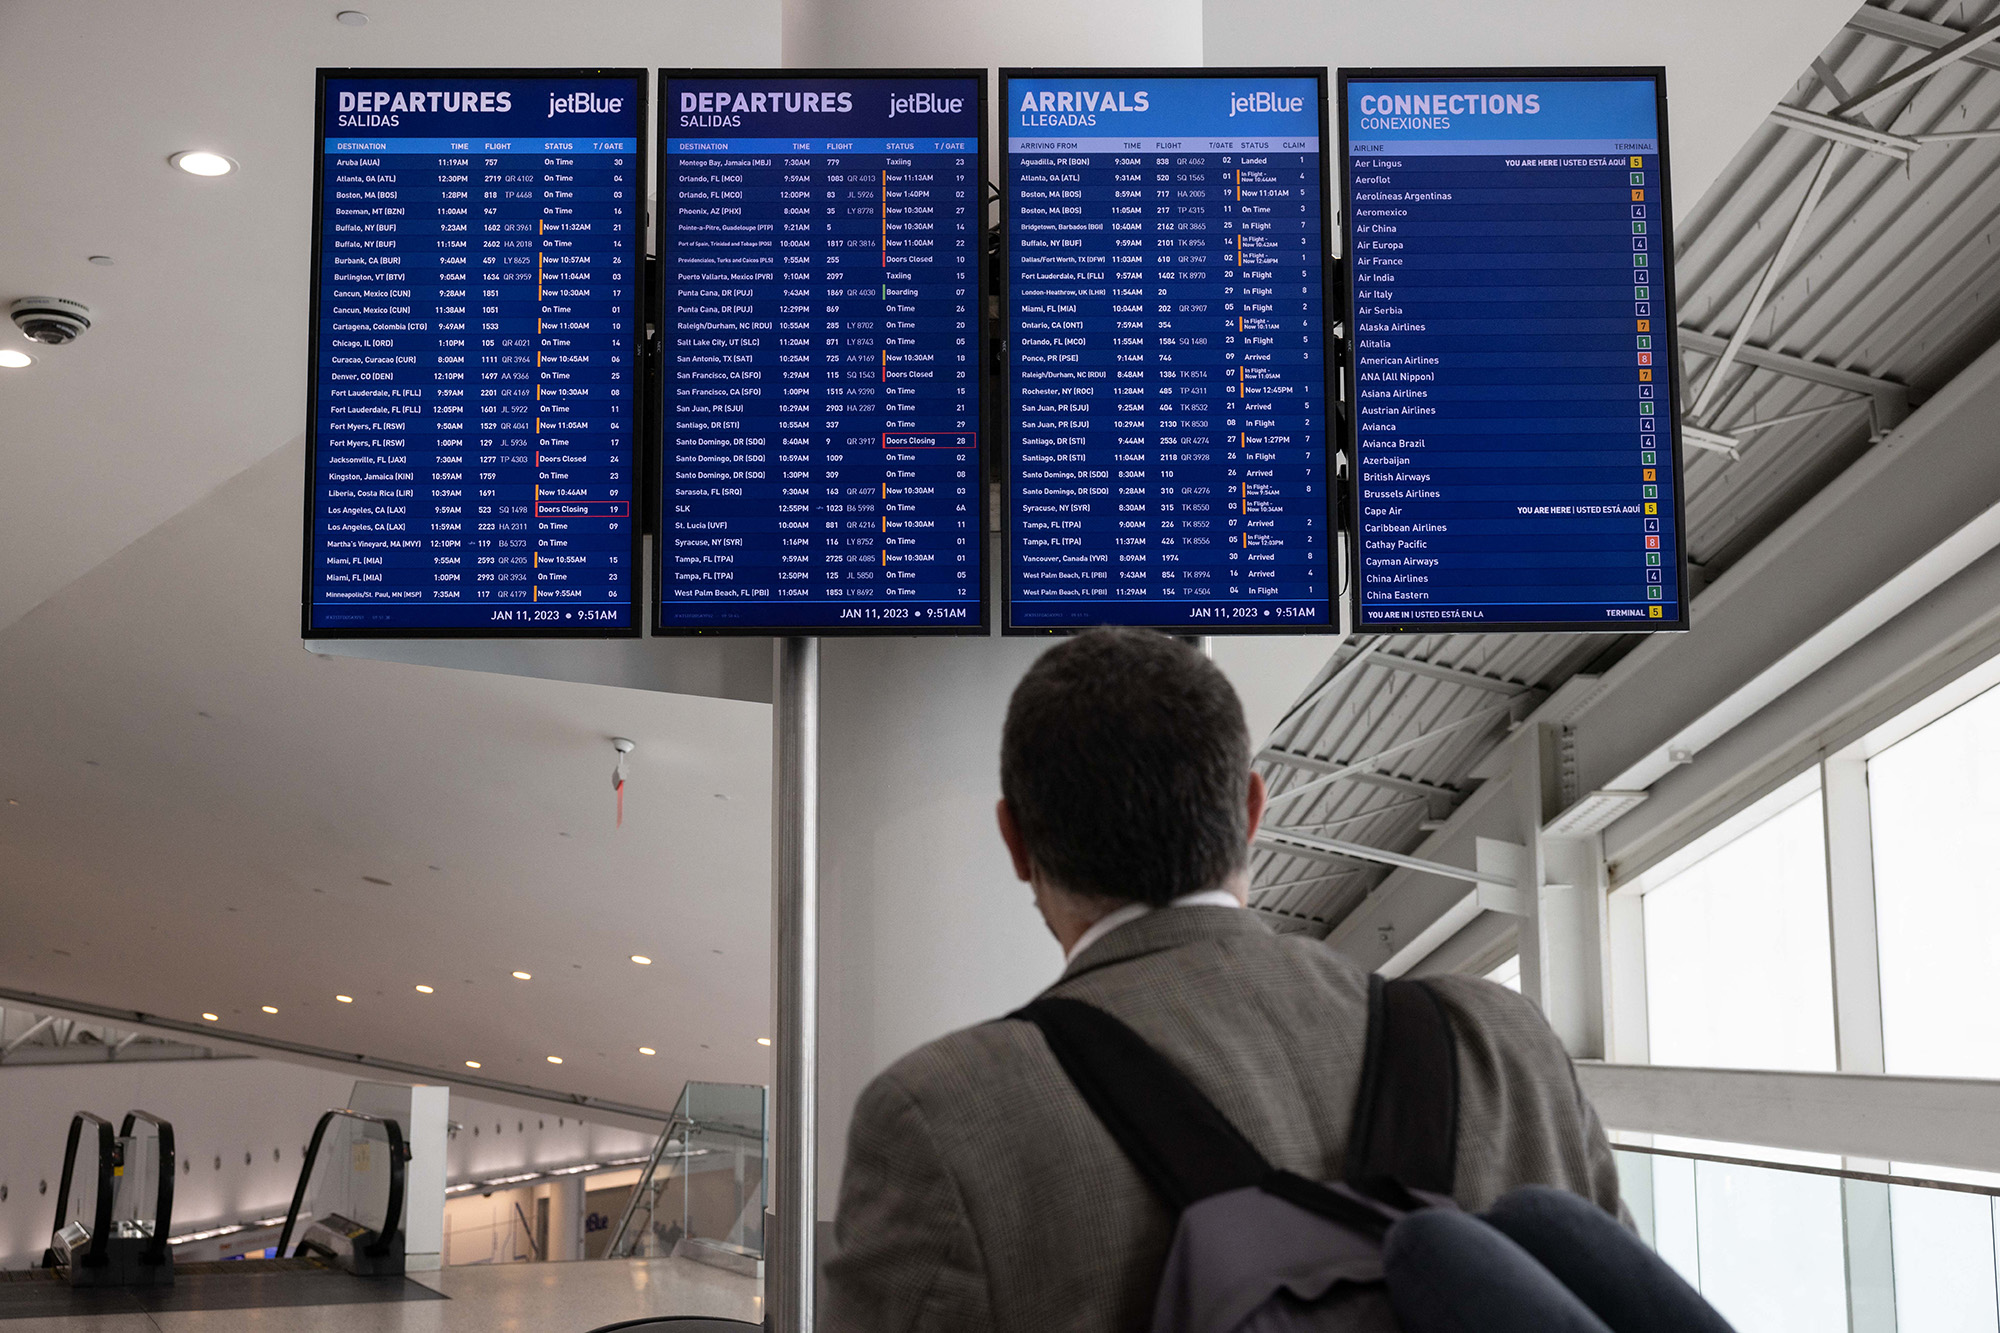 People look at the flight schedules at the JFK International Airport on January 11, 2023 in New York. - The US Federal Aviation Authority said Wednesday that normal flight operations "are resuming gradually" across the country following an overnight systems outage that grounded departures. (Photo by Yuki IWAMURA / AFP)